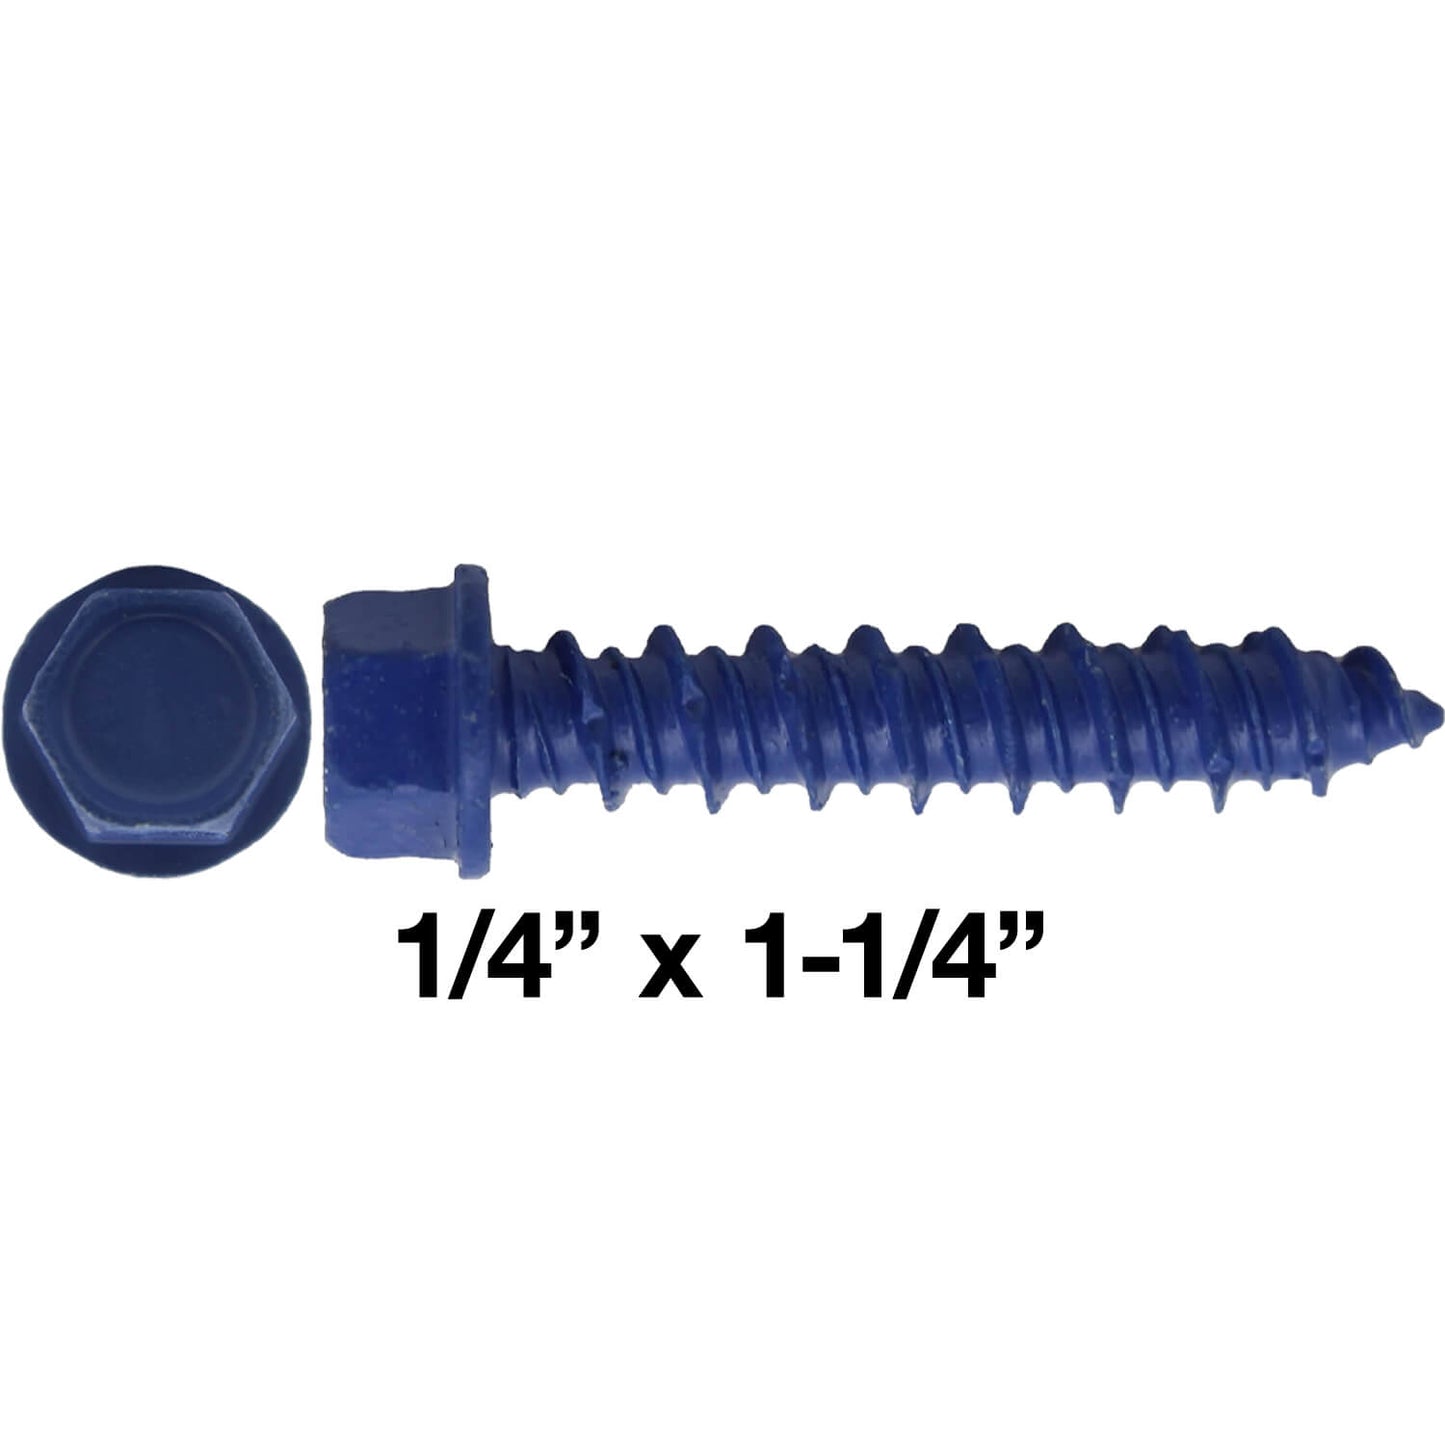 Blue Carbon Steel Hex Head Concrete Anchor Screws. Carbon Steel Hardened - Interior & Exterior Coated Rust and Corrosion Resistant Screws